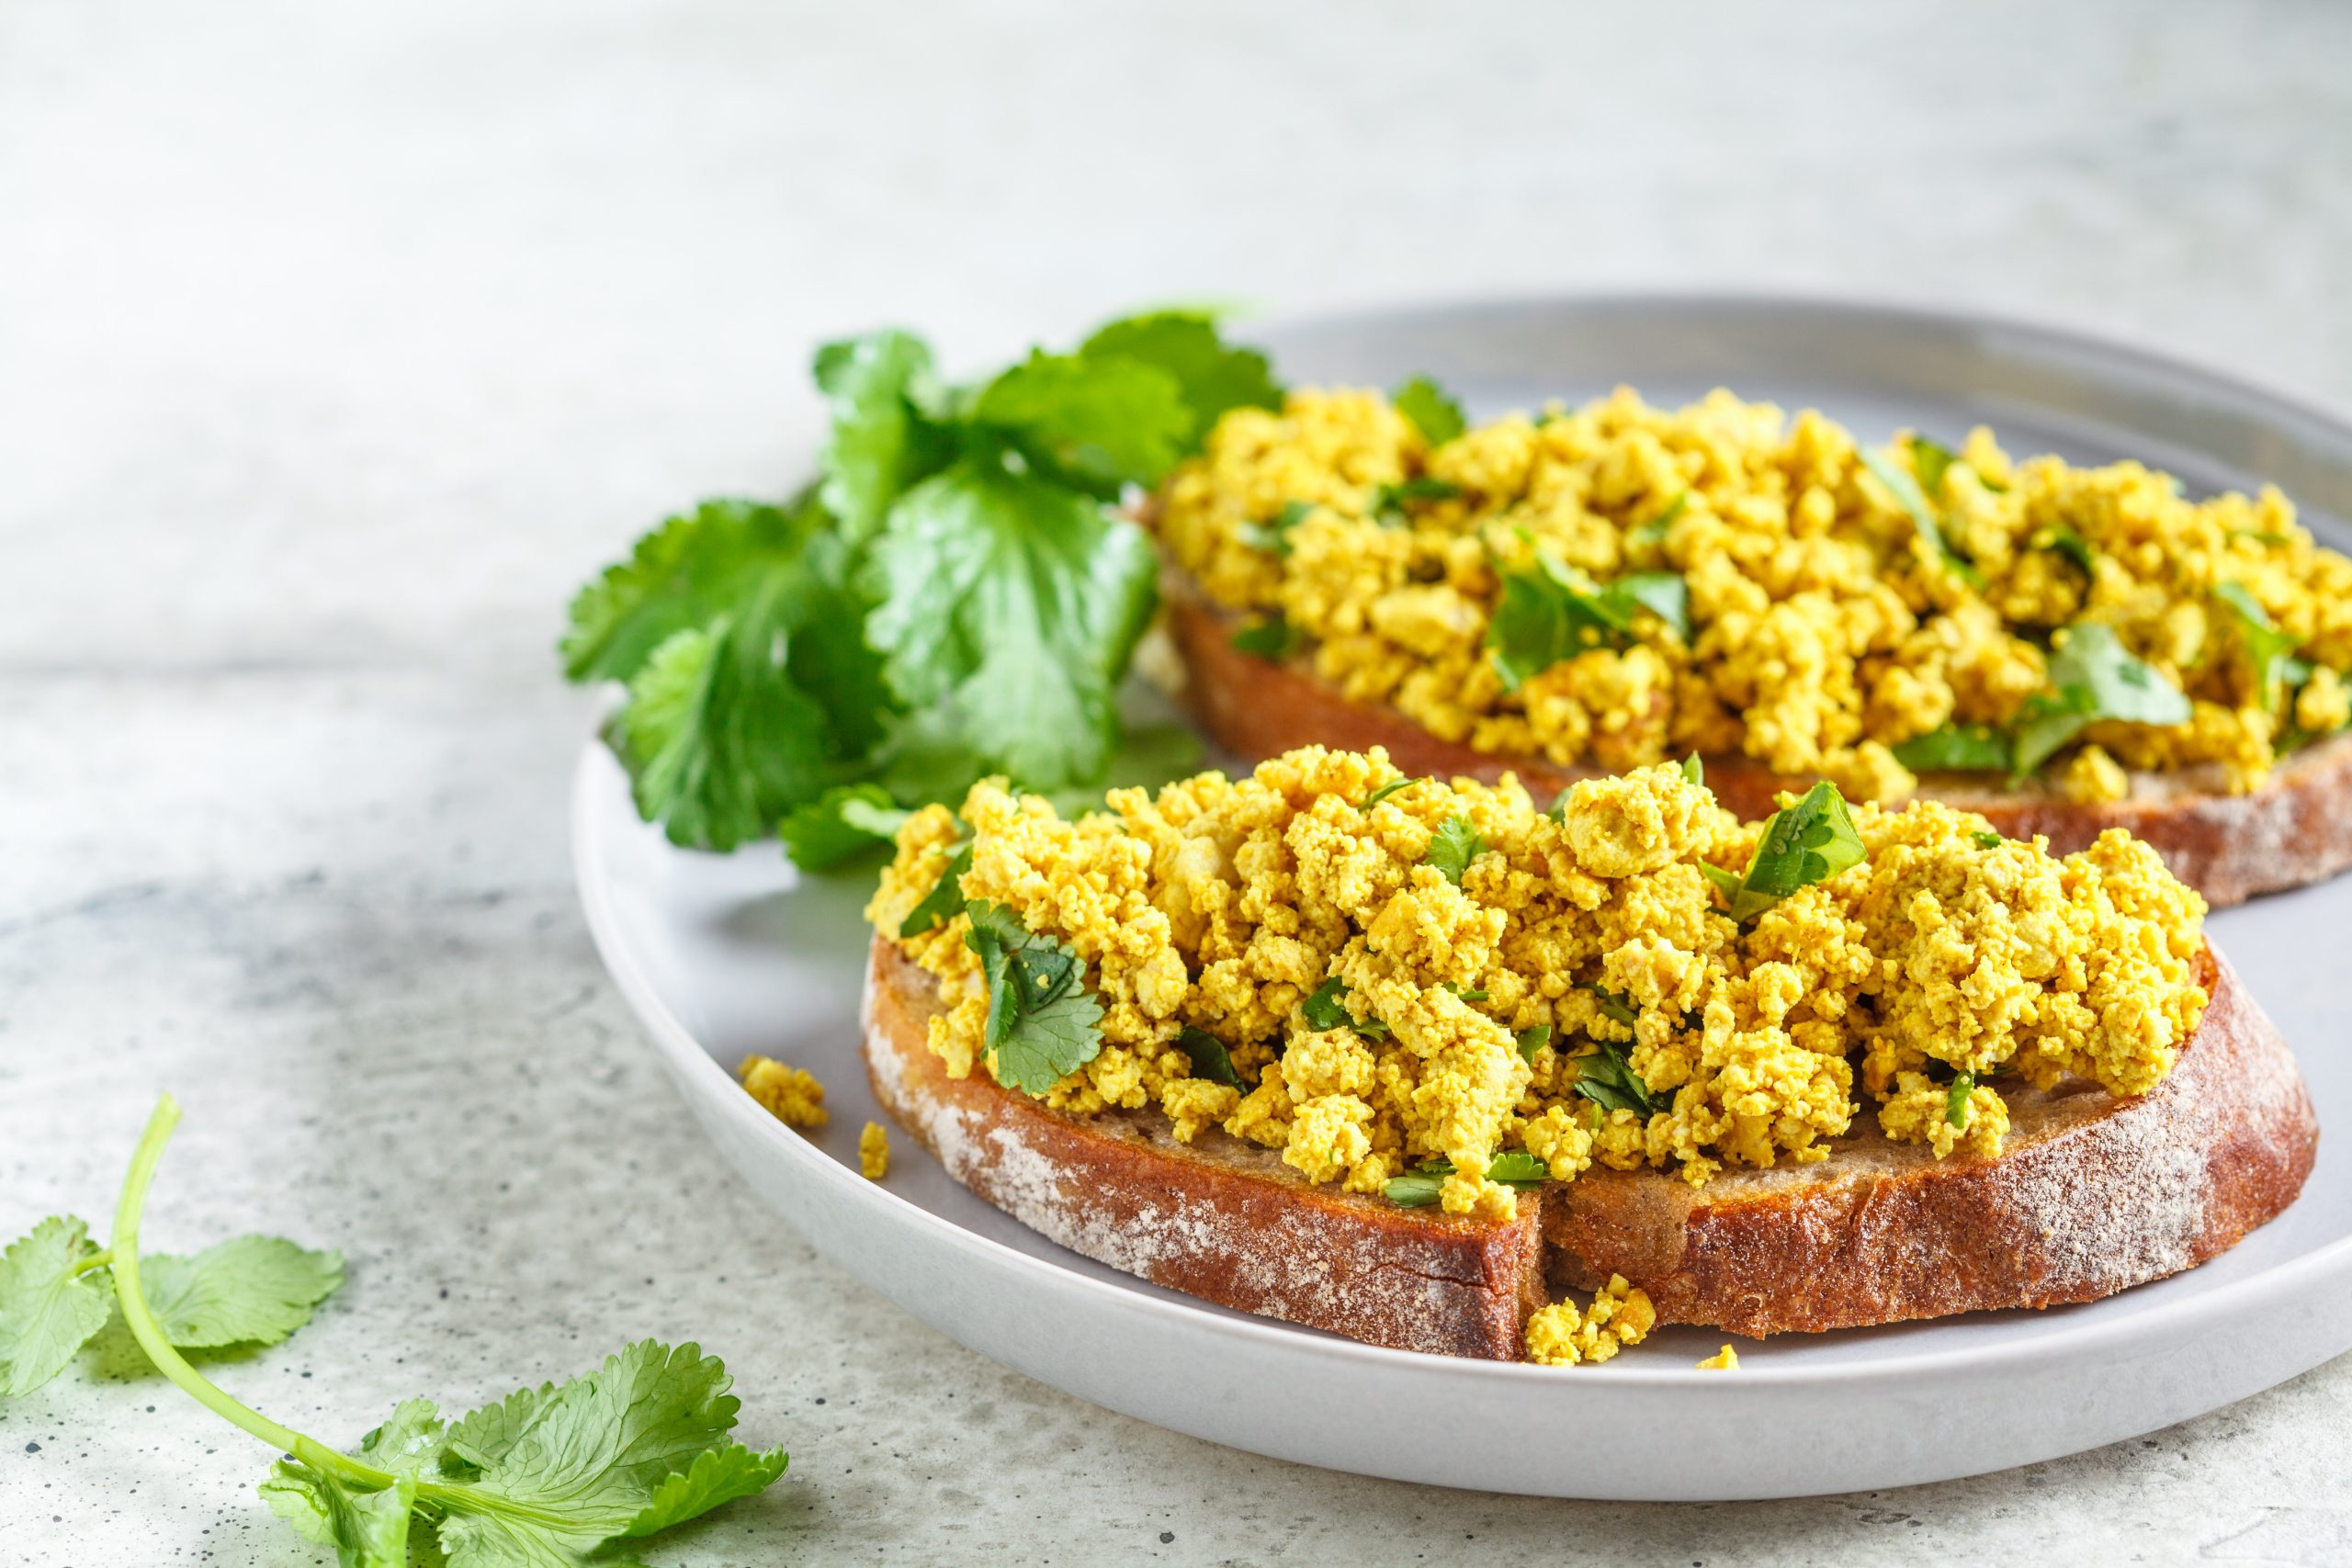 15 High-Protein Plant-Based Breakfast Ideas That Are Super Filling